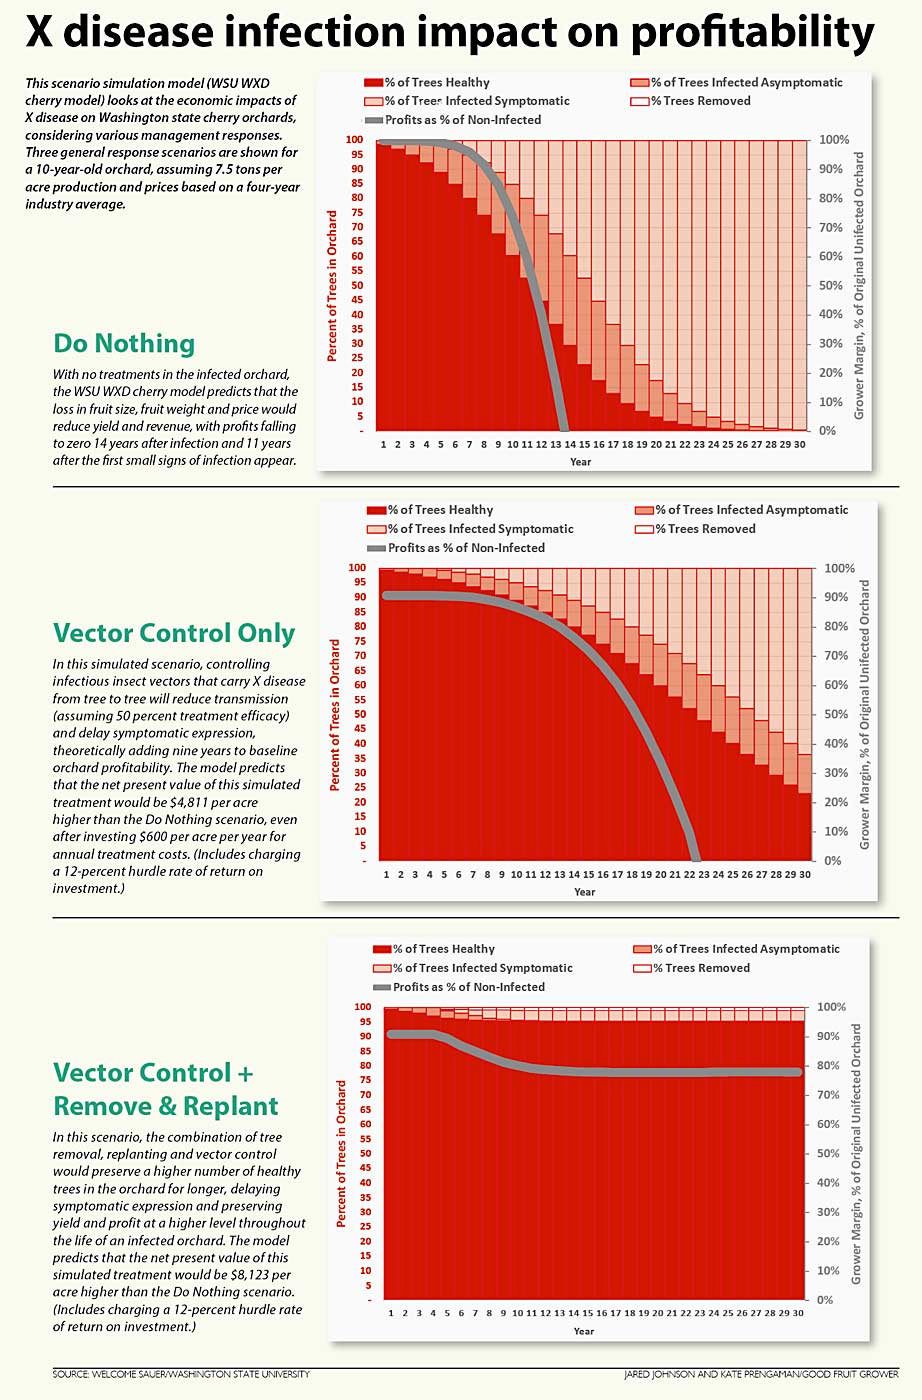 Three scenarios from a Washington State University simulation model (WSU WXD cherry model) that looks at the economic impacts of X disease on Washington state cherry orchards, considering various management responses. (Source: Welcome Sauer/Washington State University; Graphic: Jared Johnson and Kate Prengaman/Good Fruit Grower)